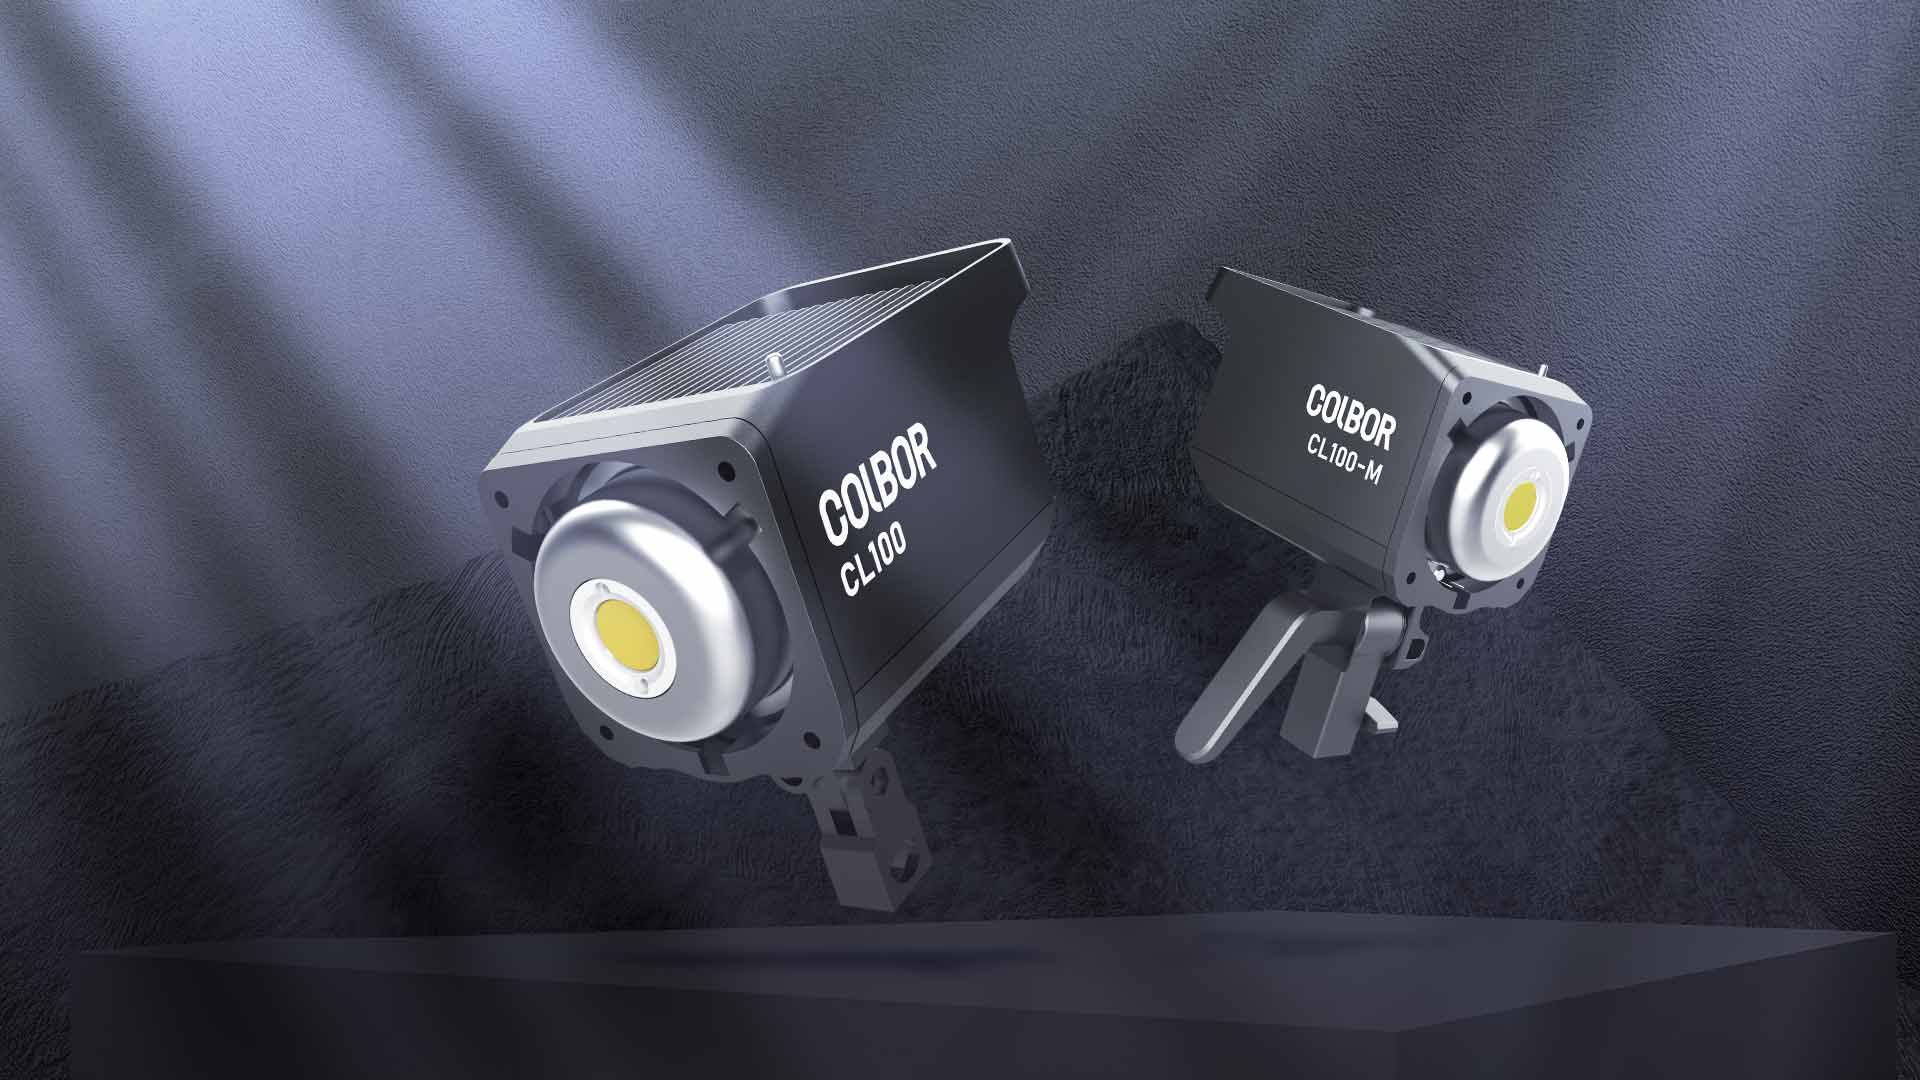 Bi color LED vs daylight: which one is better?